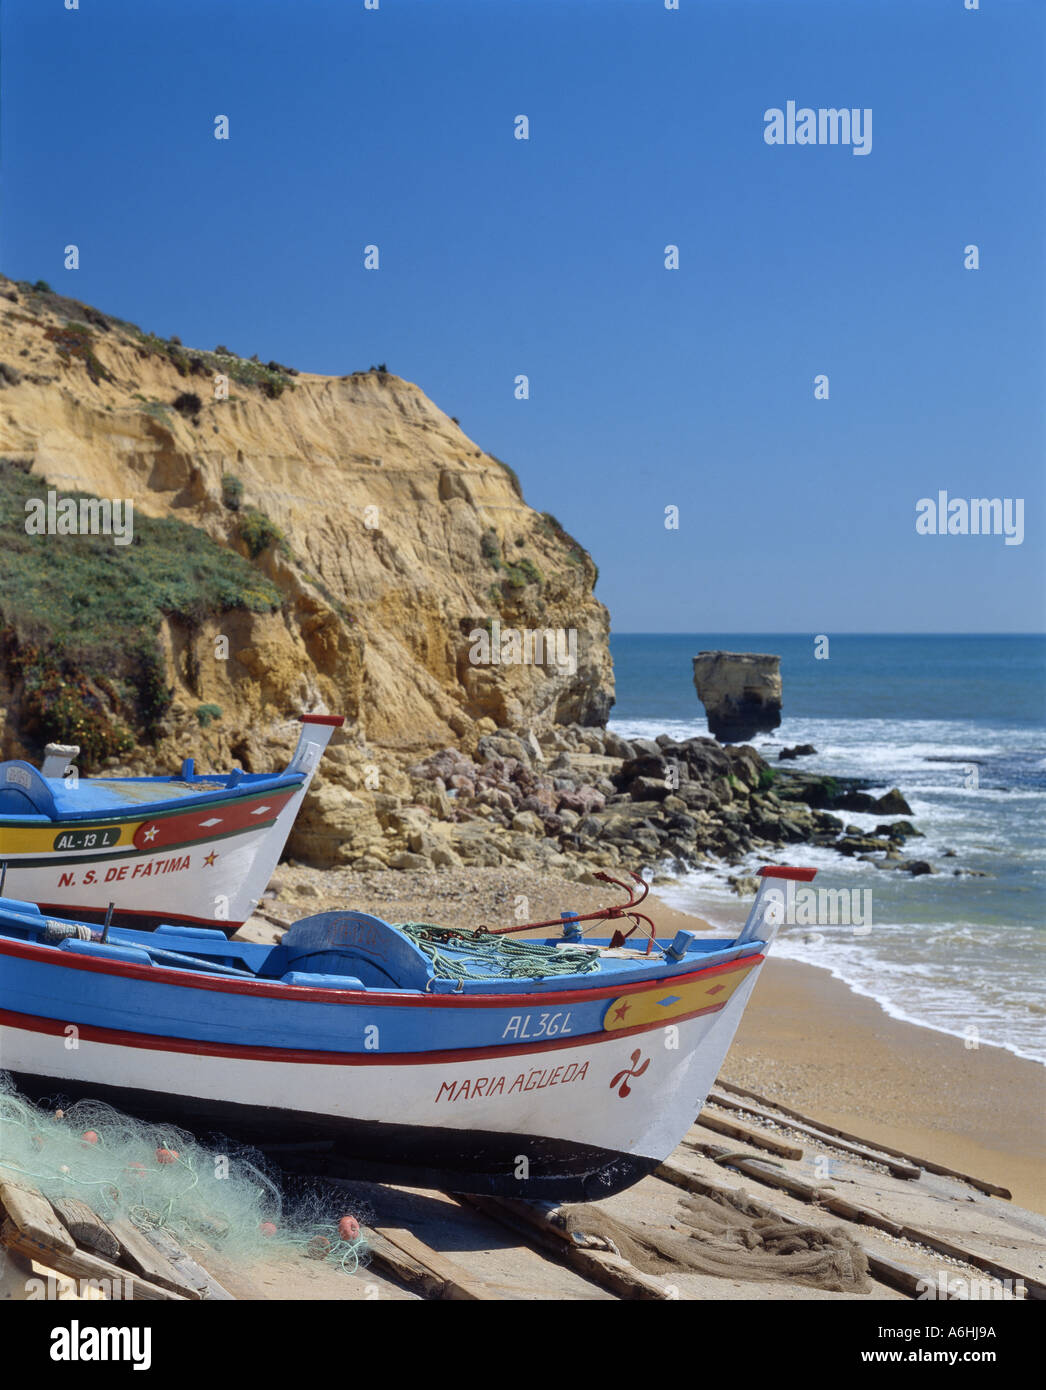 Portugal the Algarve, Olhos de Agua, fishing boats drawn up on beach, cliff in background Stock Photo